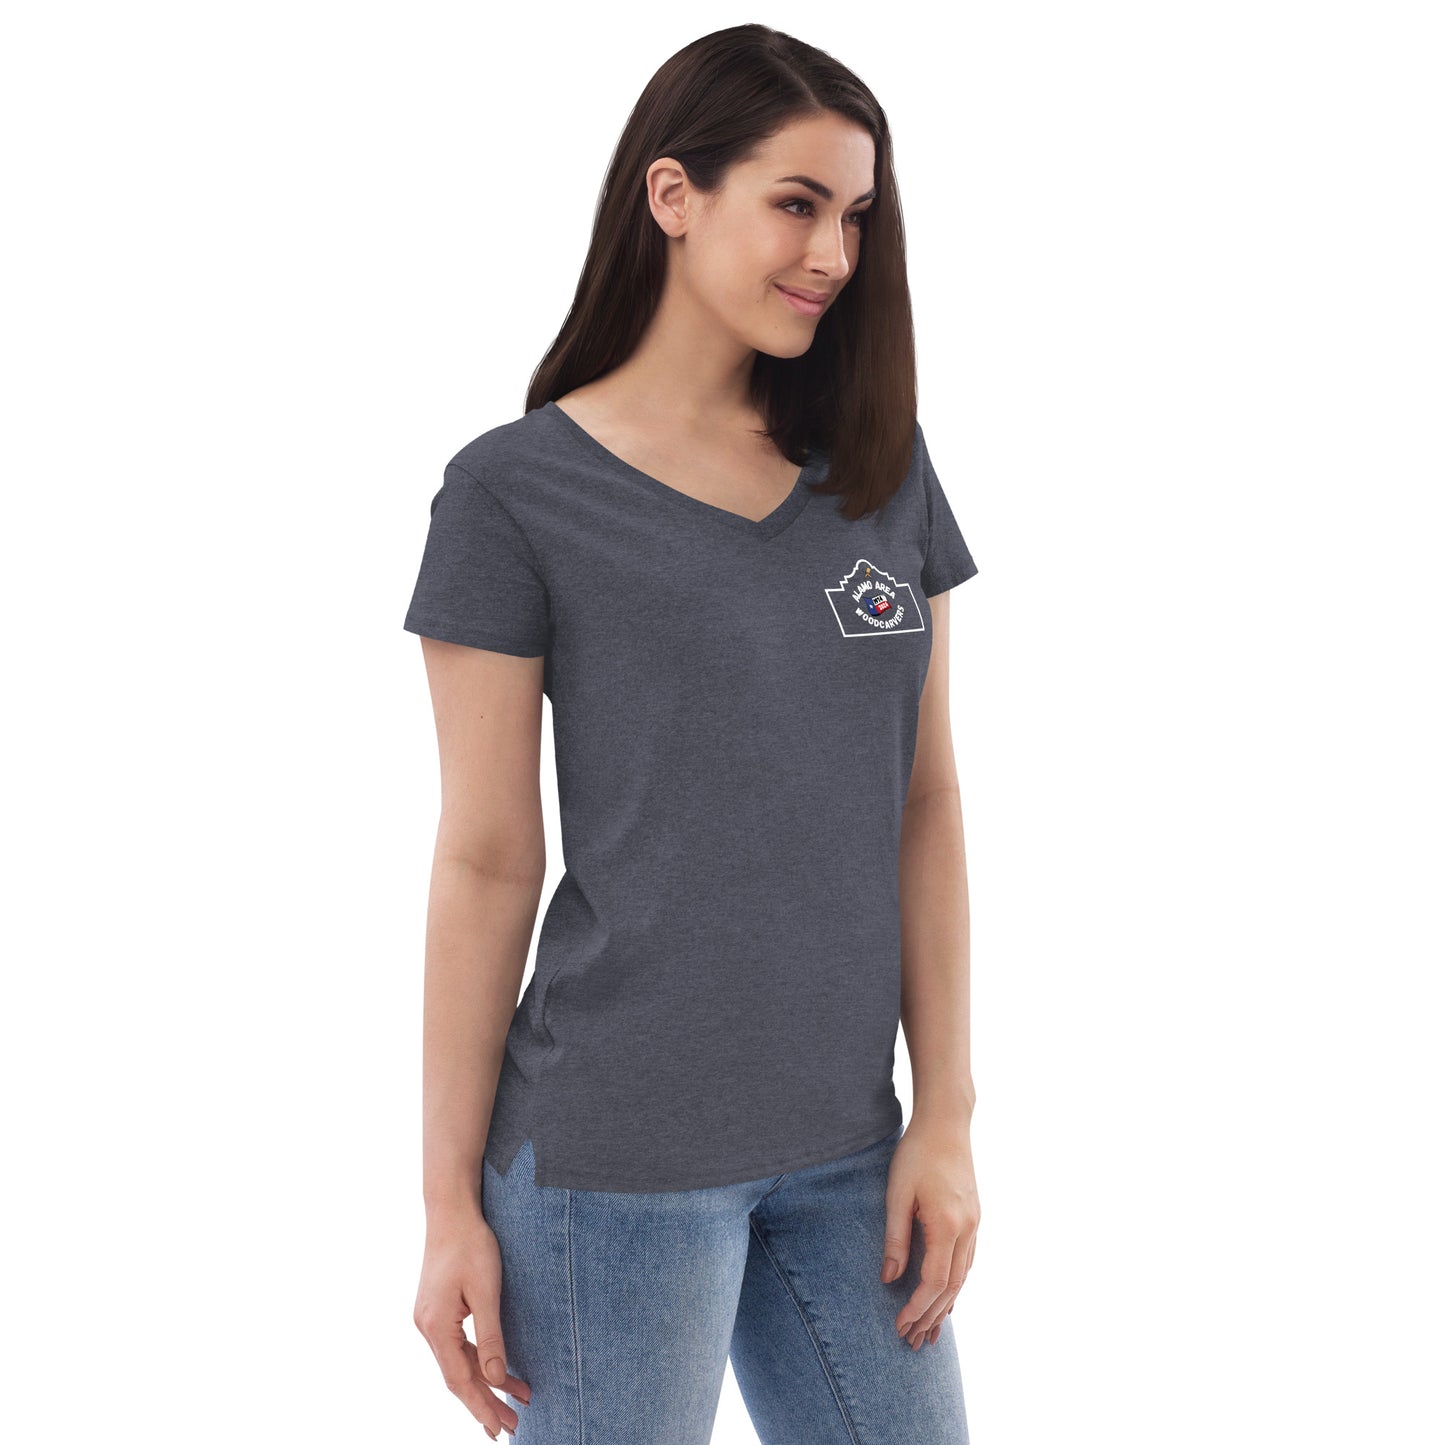 AAWC 50th Anniversary Logo Women’s recycled V-neck t-shirt